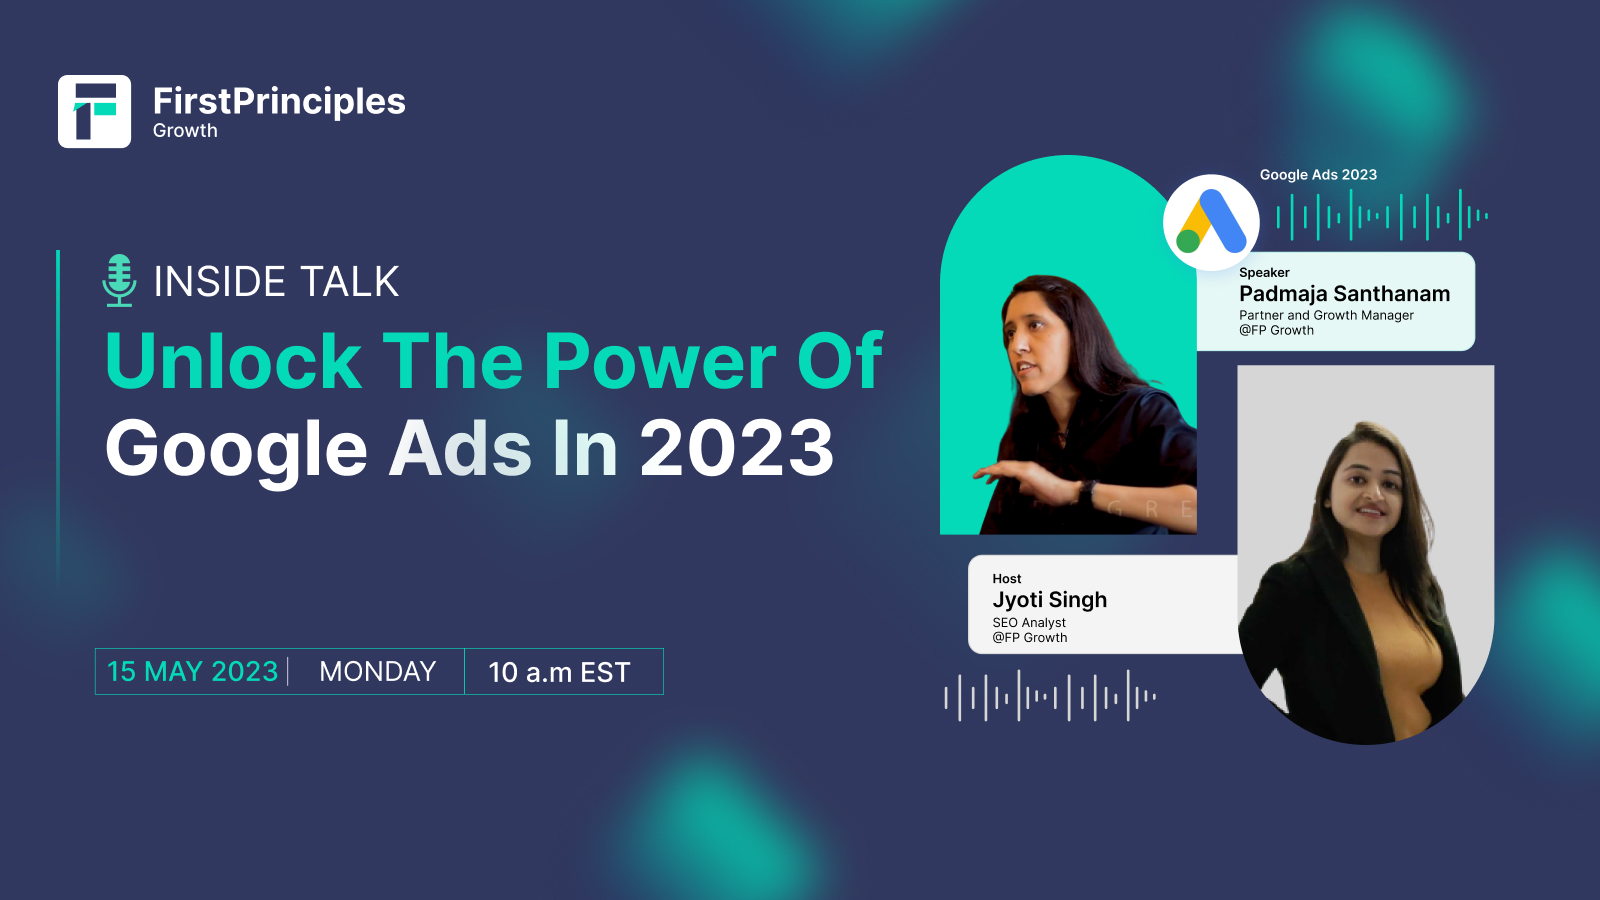 Unlock the Power of Google Ads in 2023